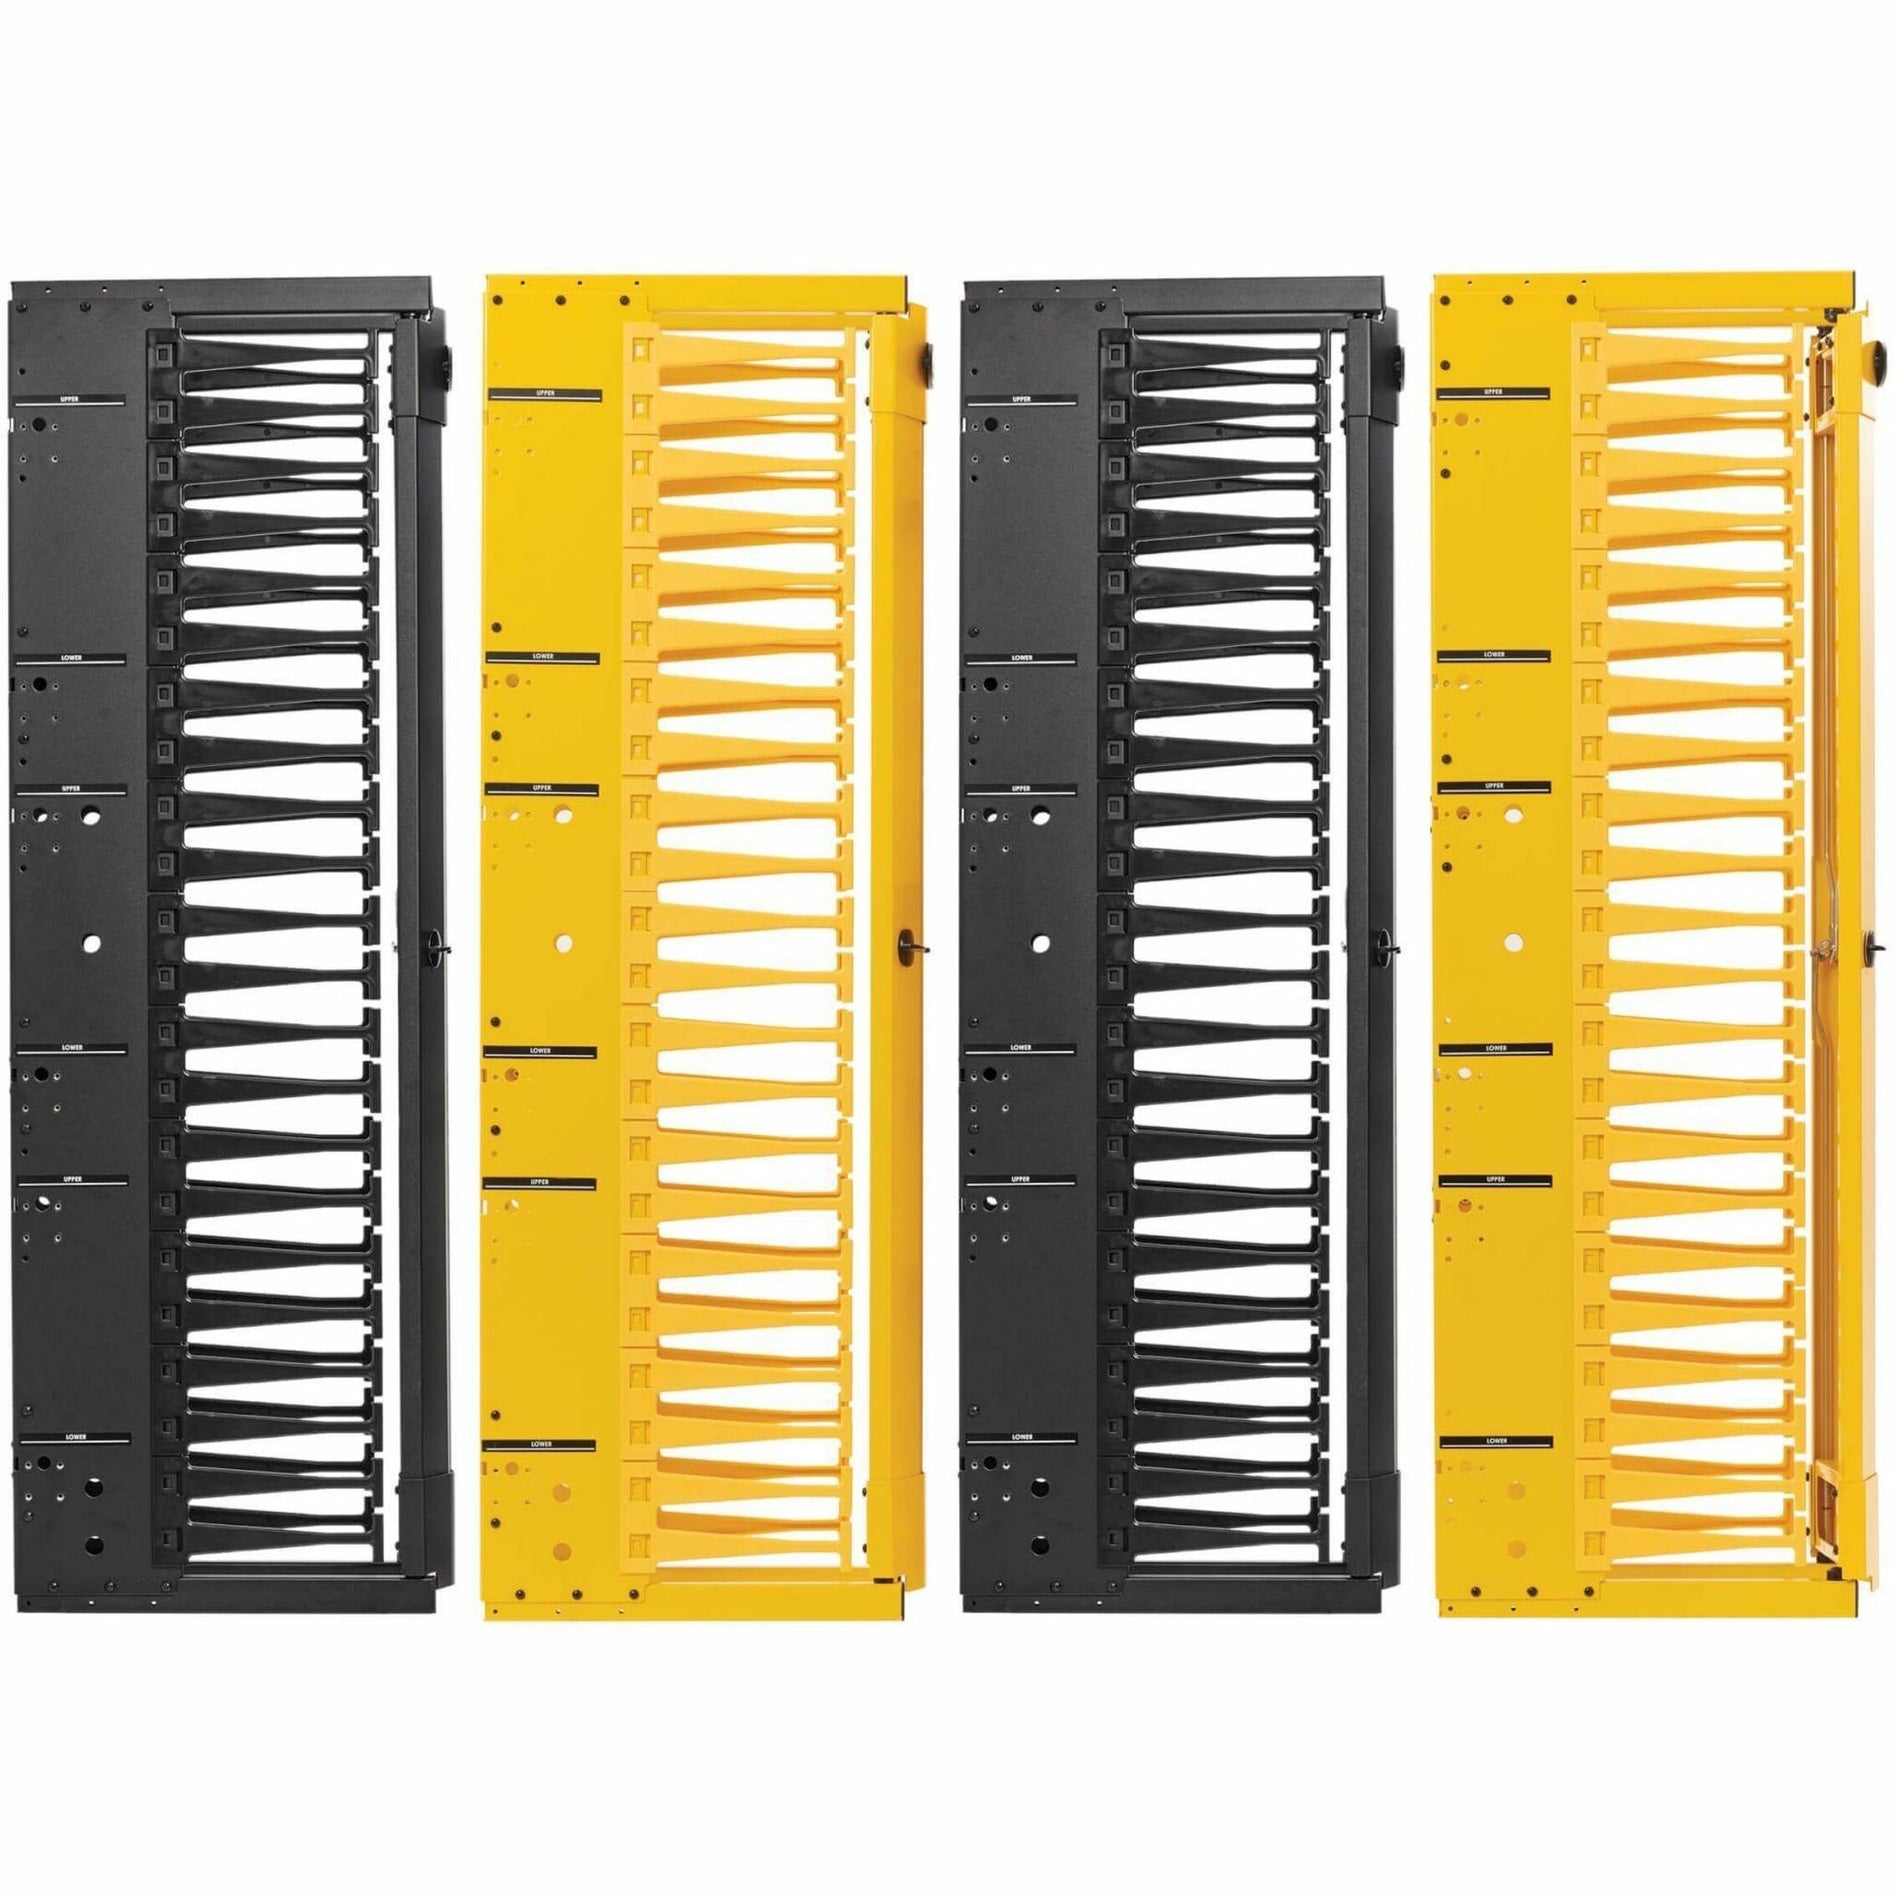 Tripp Lite SRCABLEVRT6HD2F Cable Organizer, Double Sided Finger Duct, 6" Width, Black and Yellow